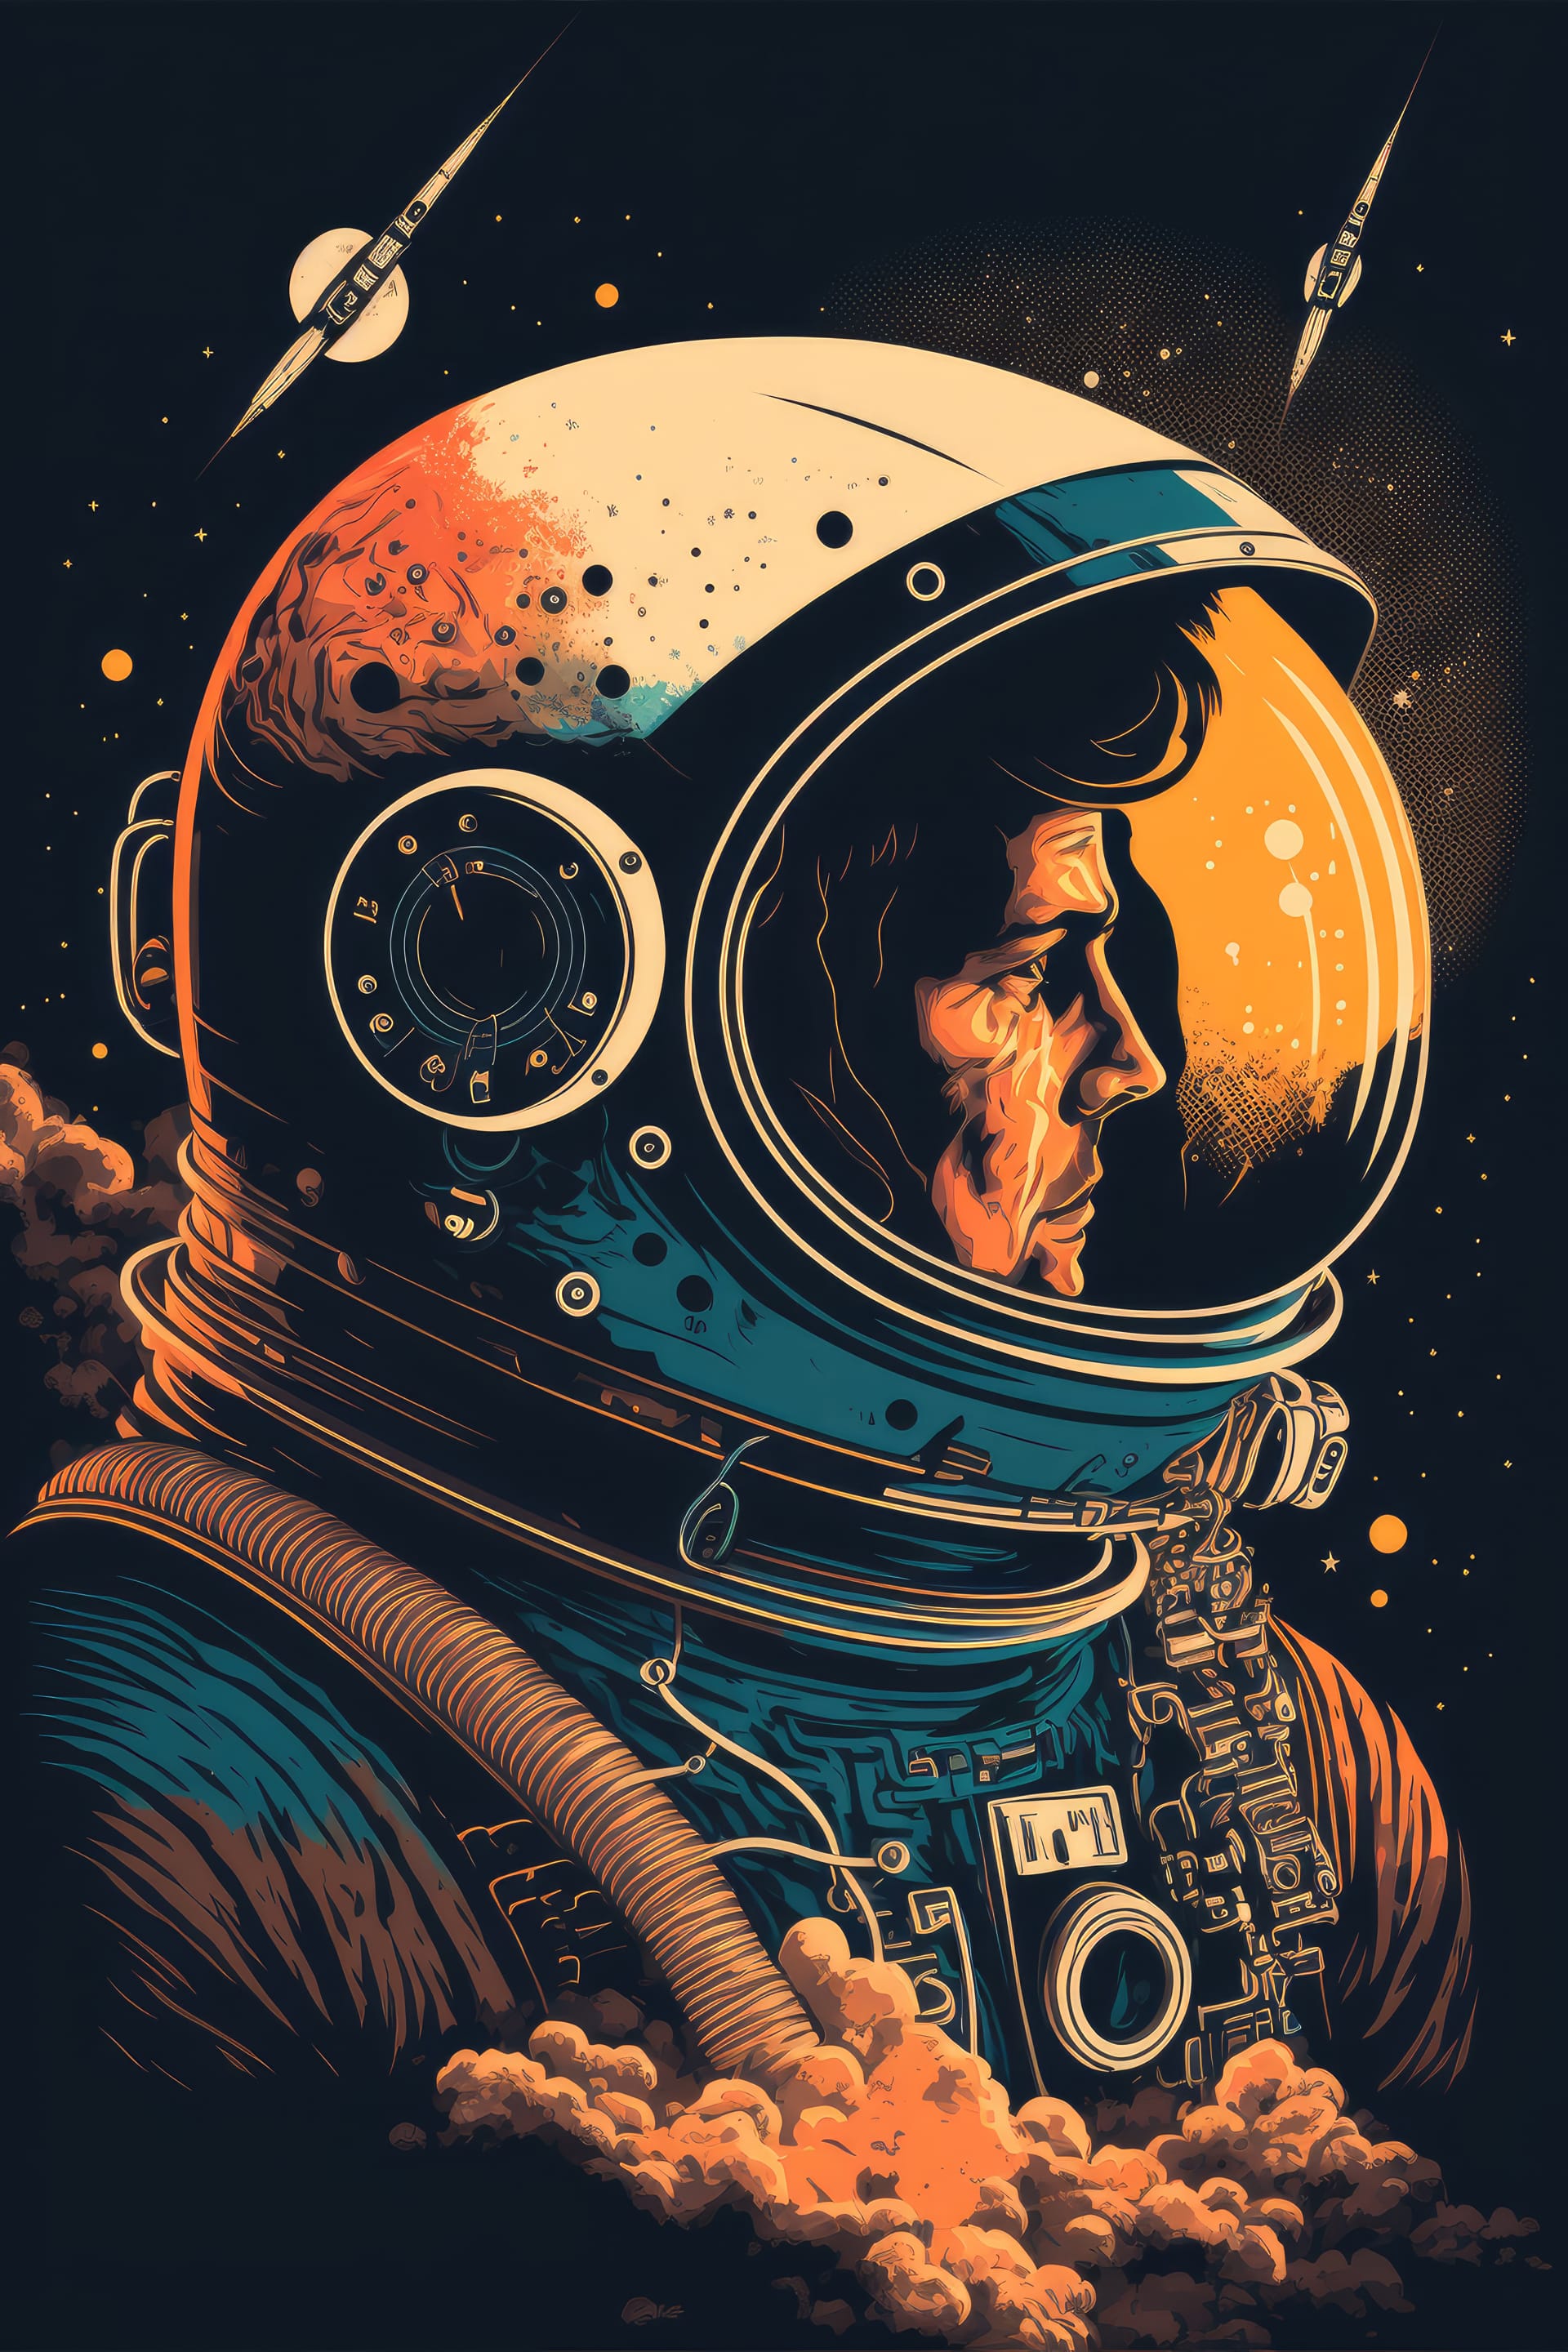 Colorful poster with astronaut planets stars vintage style illustration generated